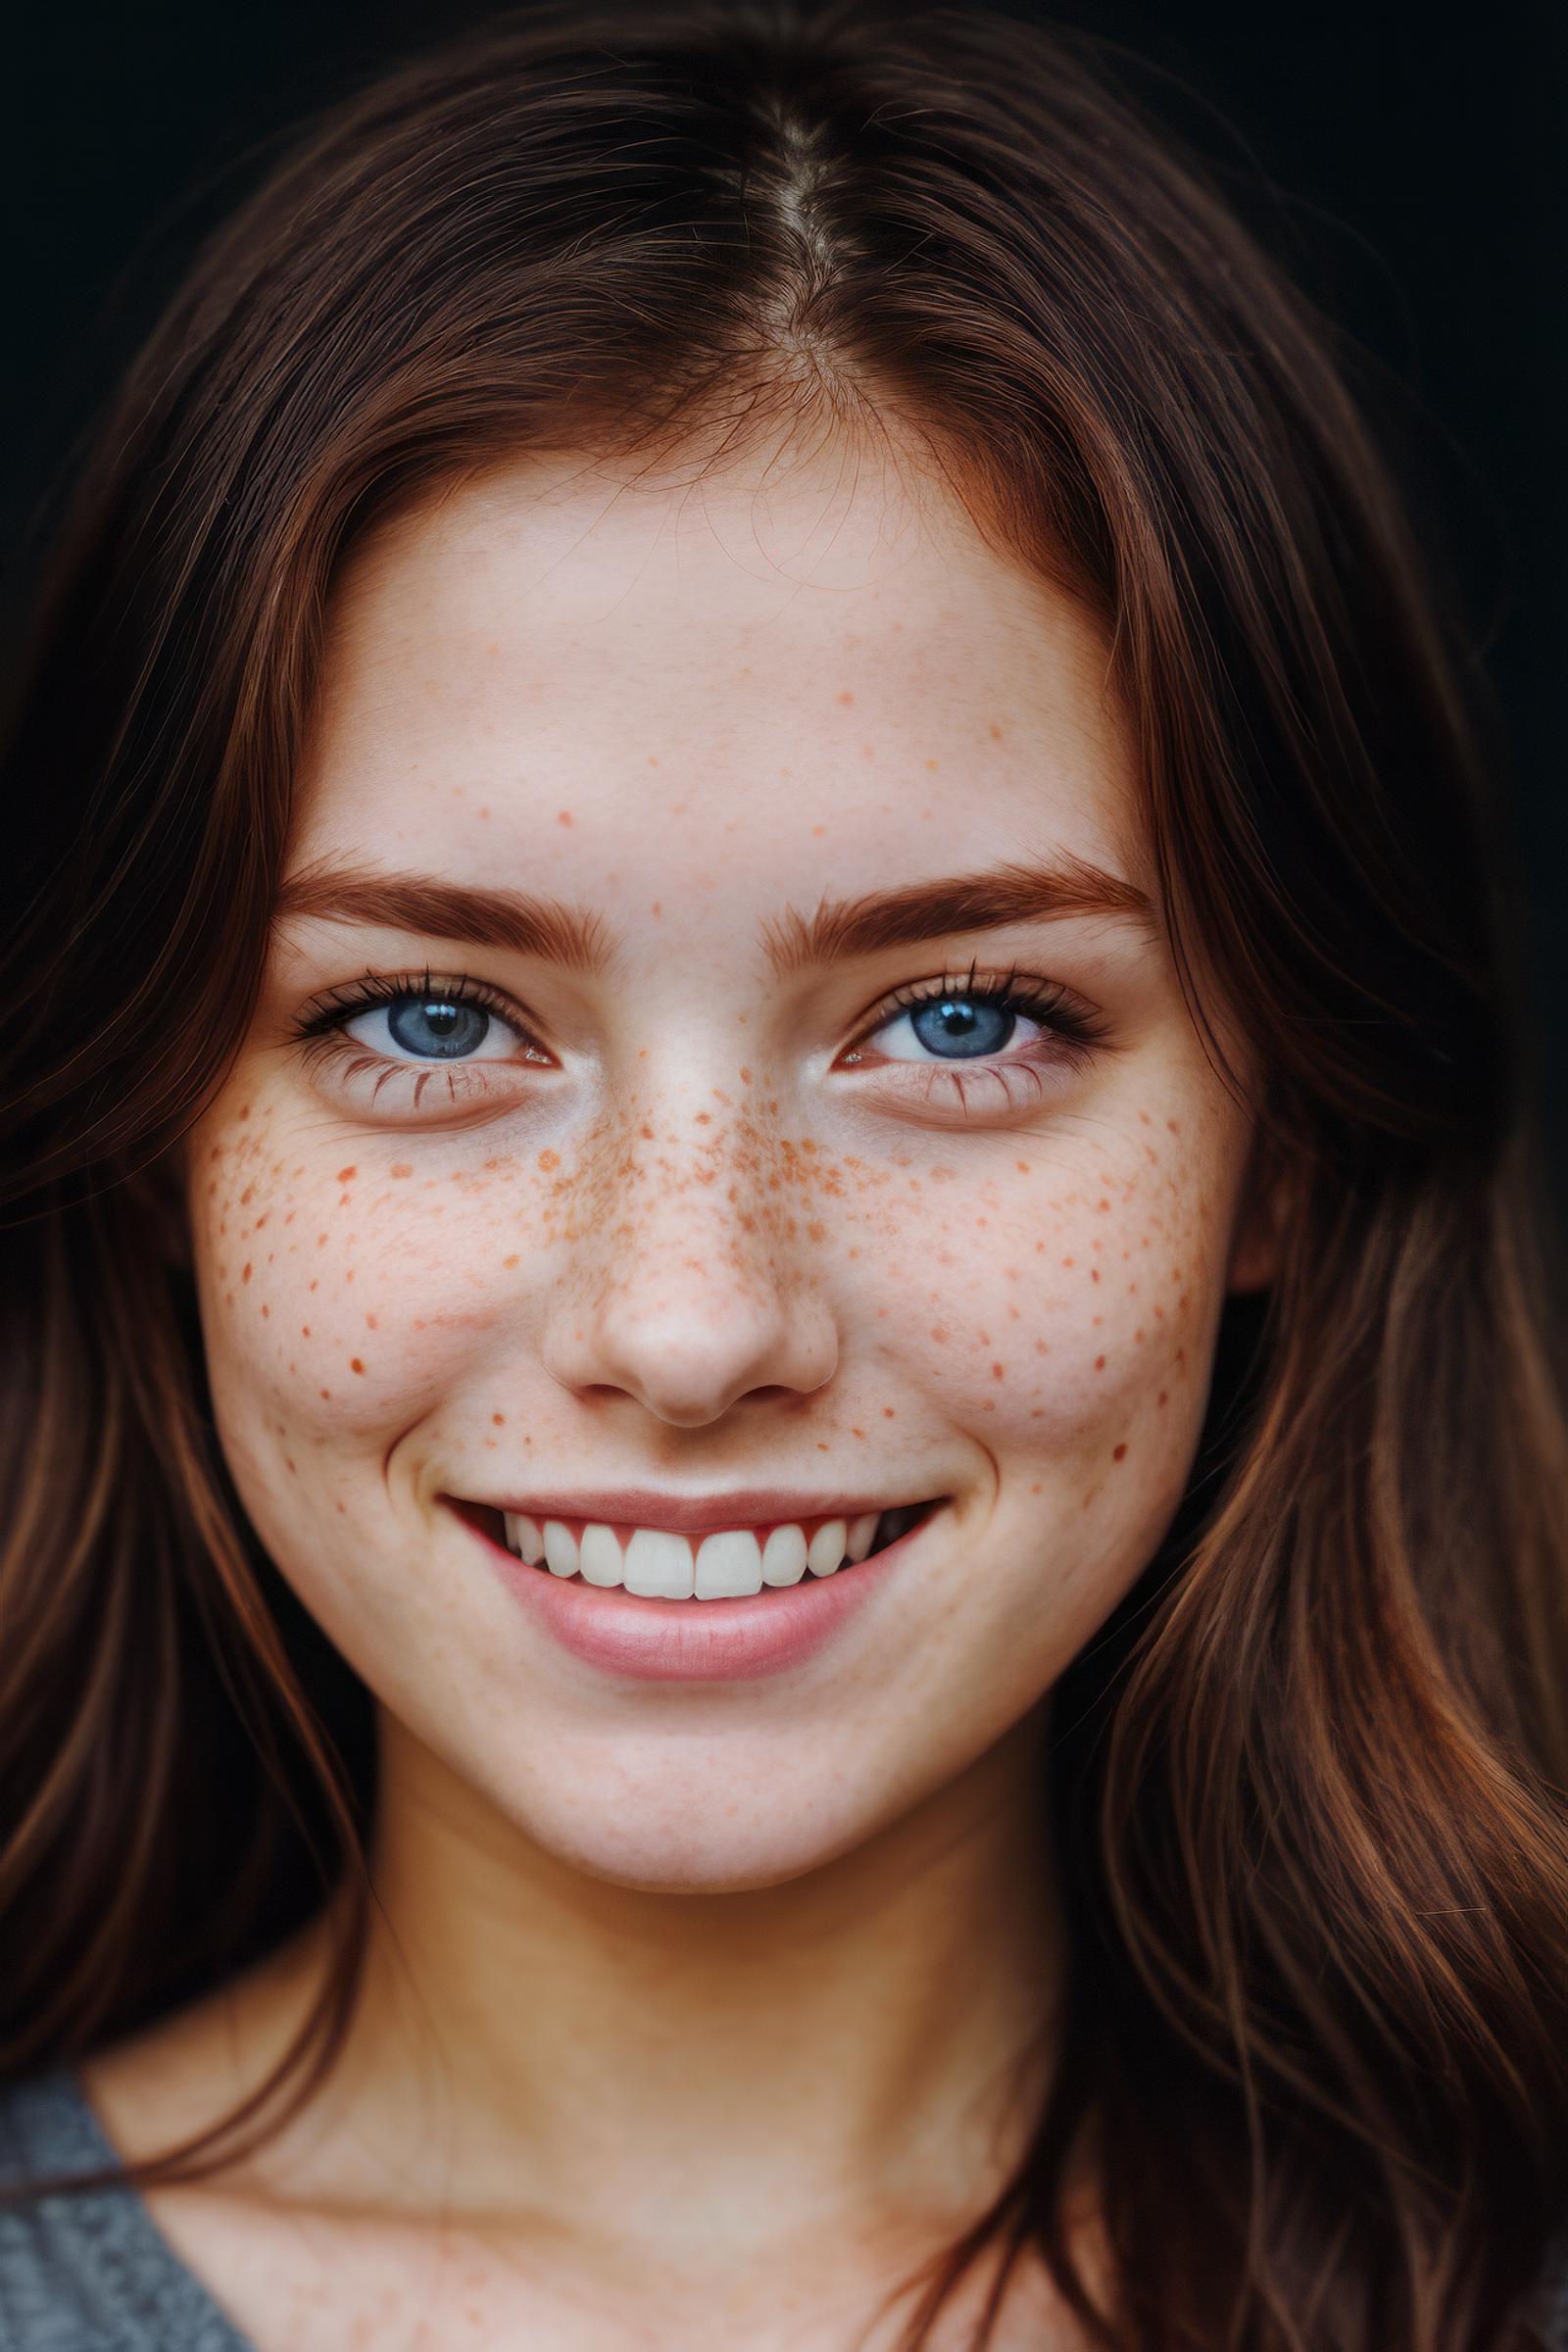 A smiling woman with freckles and blue eyes.